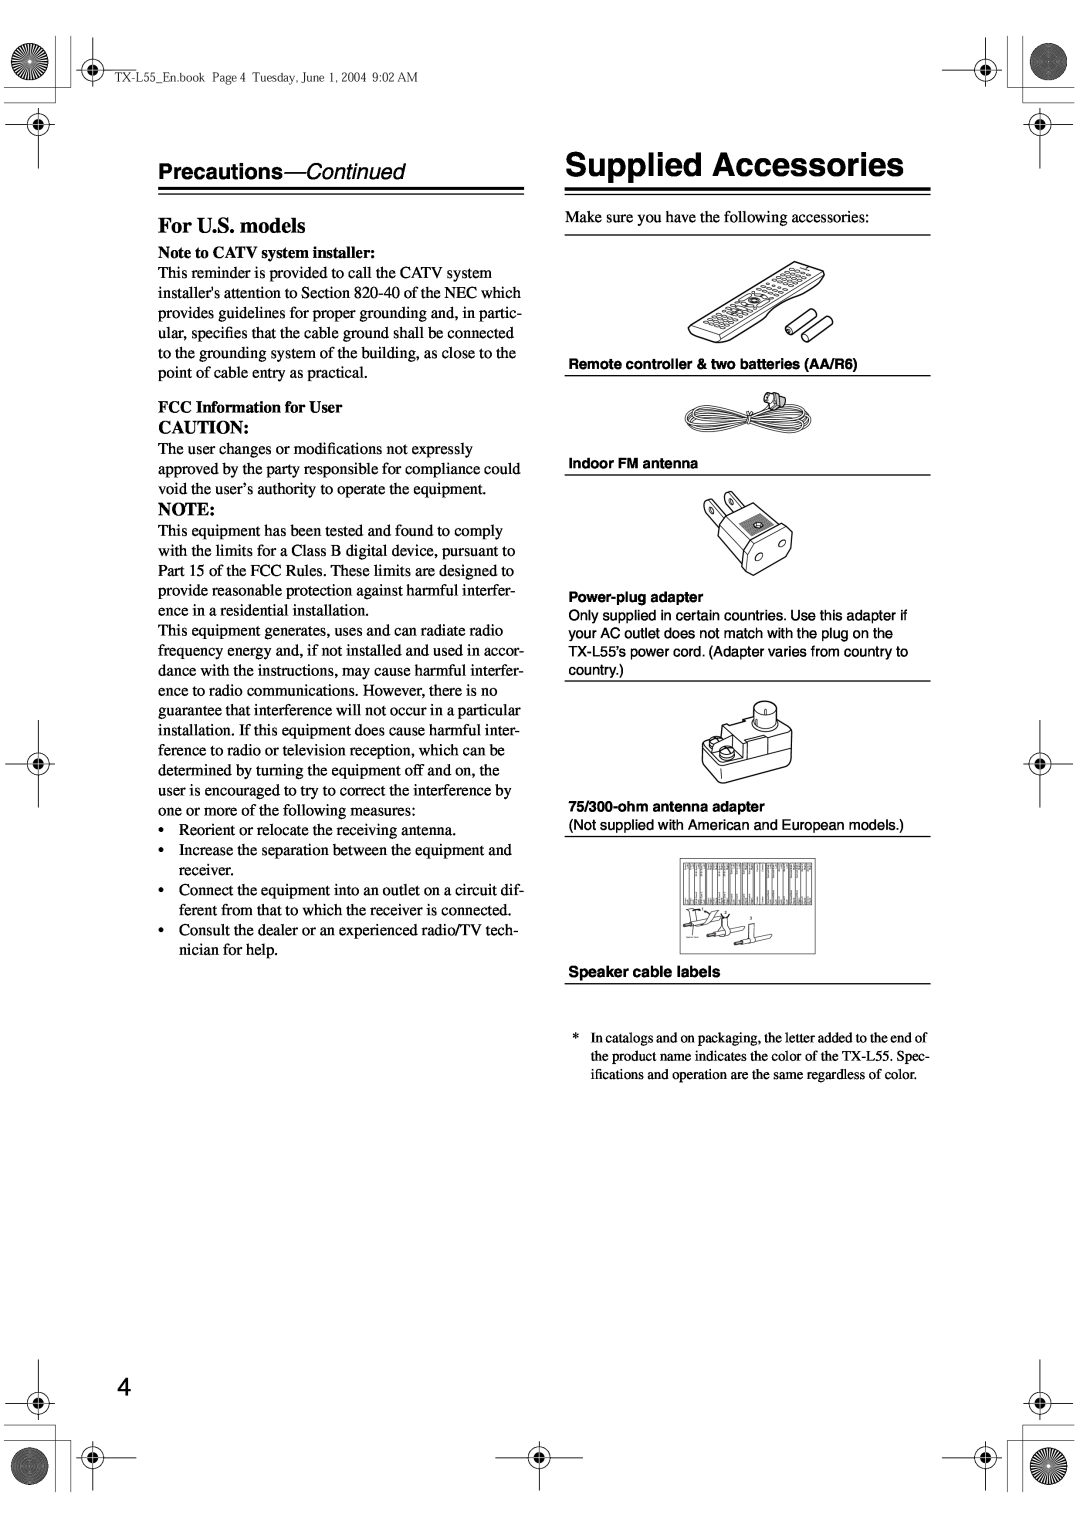 Onkyo TX-L55 instruction manual Supplied Accessories, Precautions-Continued, For U.S. models, Note to CATV system installer 